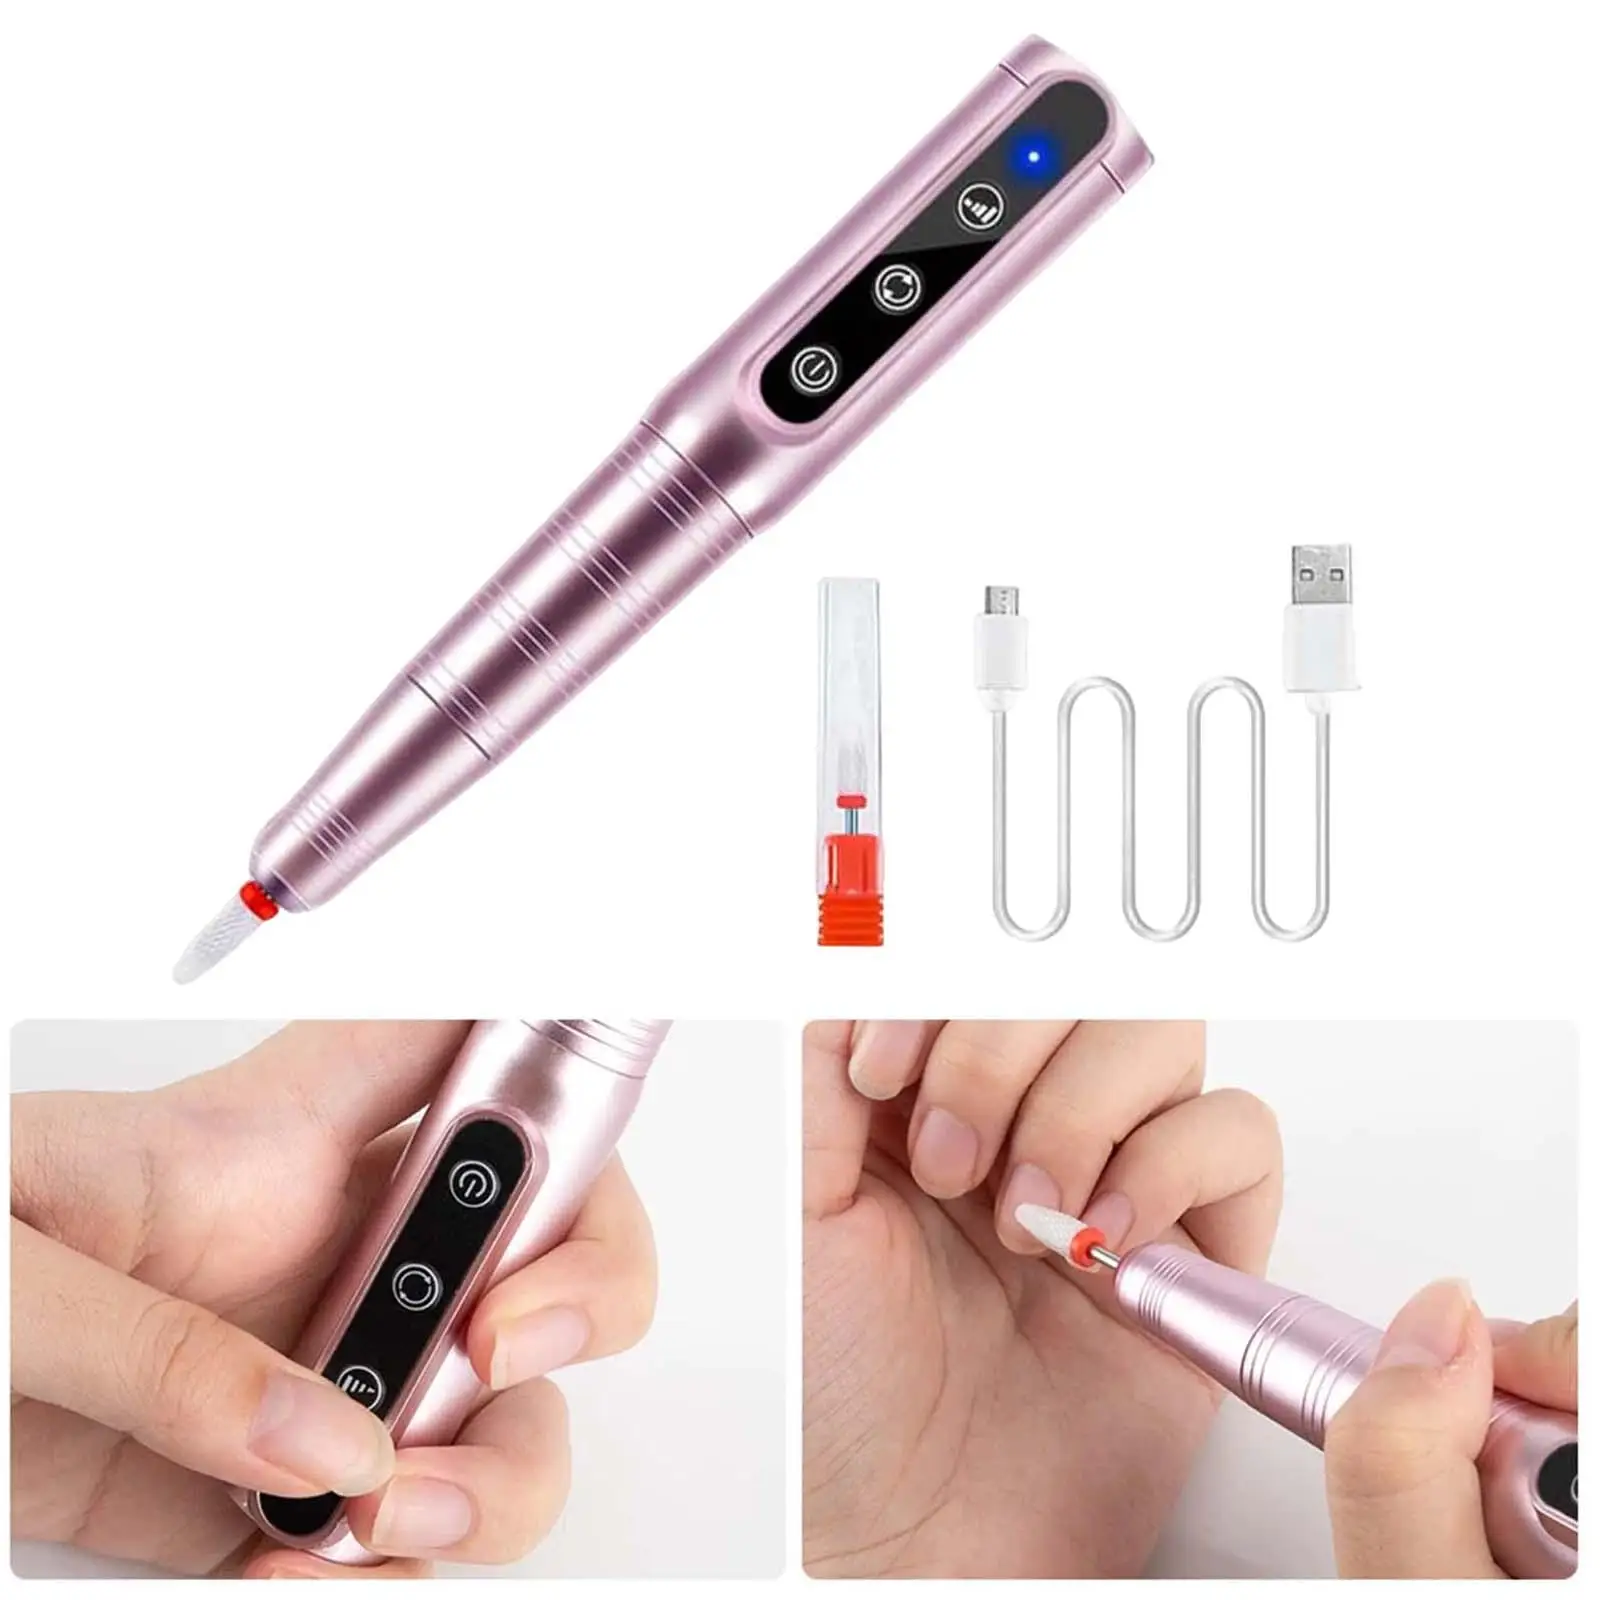 Professional Nail File Machine Cordless Electric Nail Drill for Home or Salon Use Removing Acrylic Gel Nails Polishing Shaping